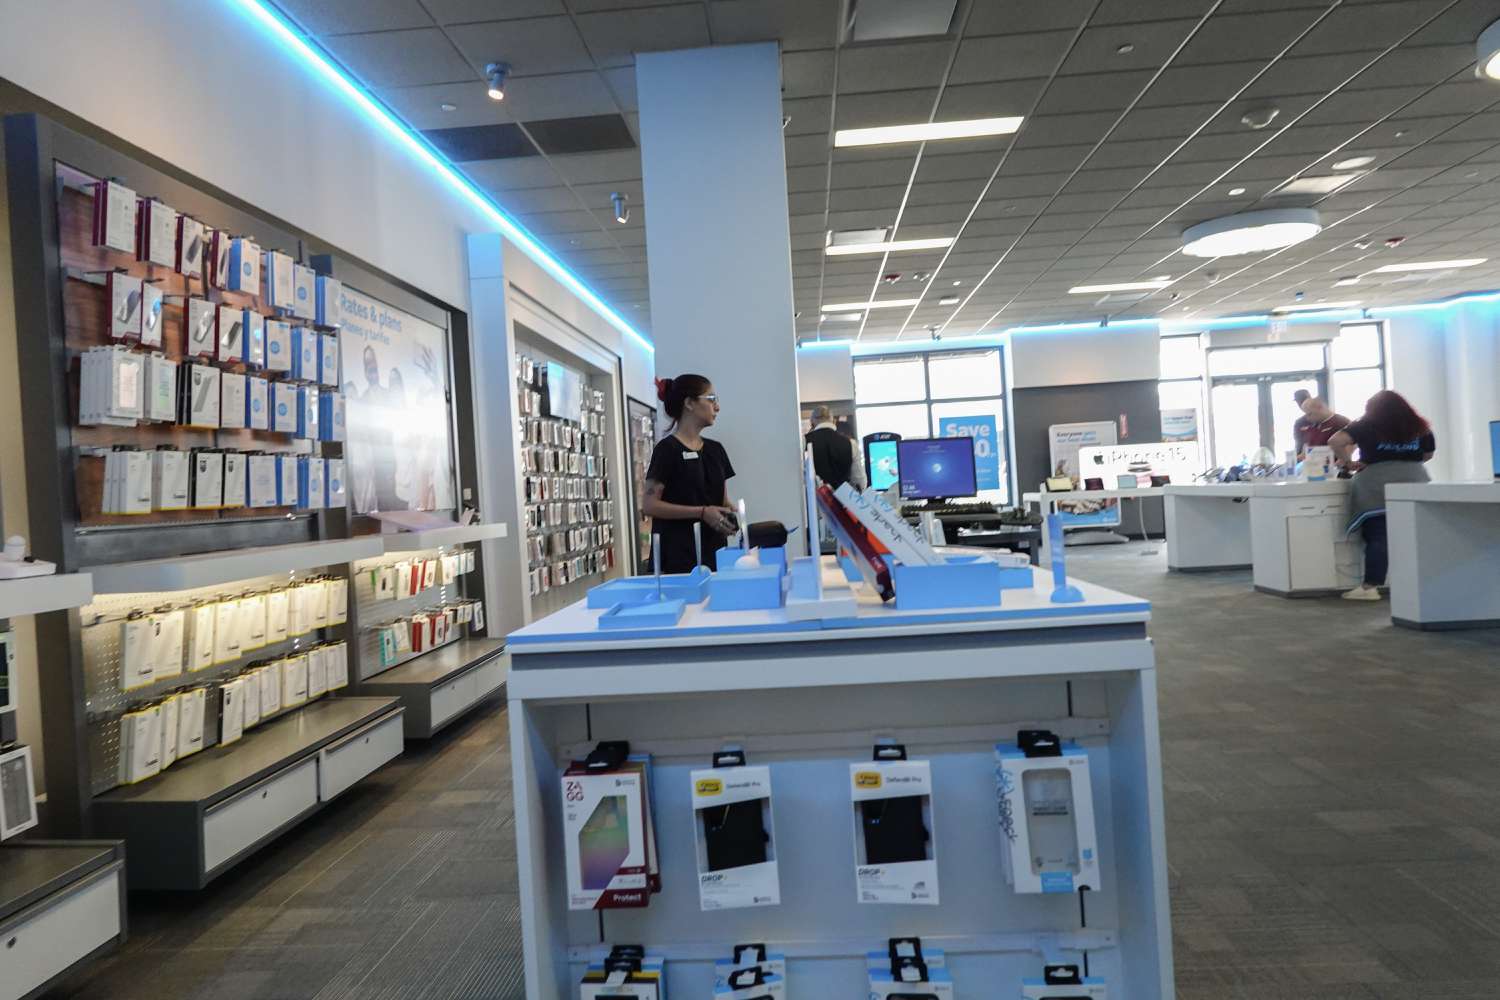 AT&T Misses Revenue Estimates But Adds Mobile, Broadband Subscribers [Video]